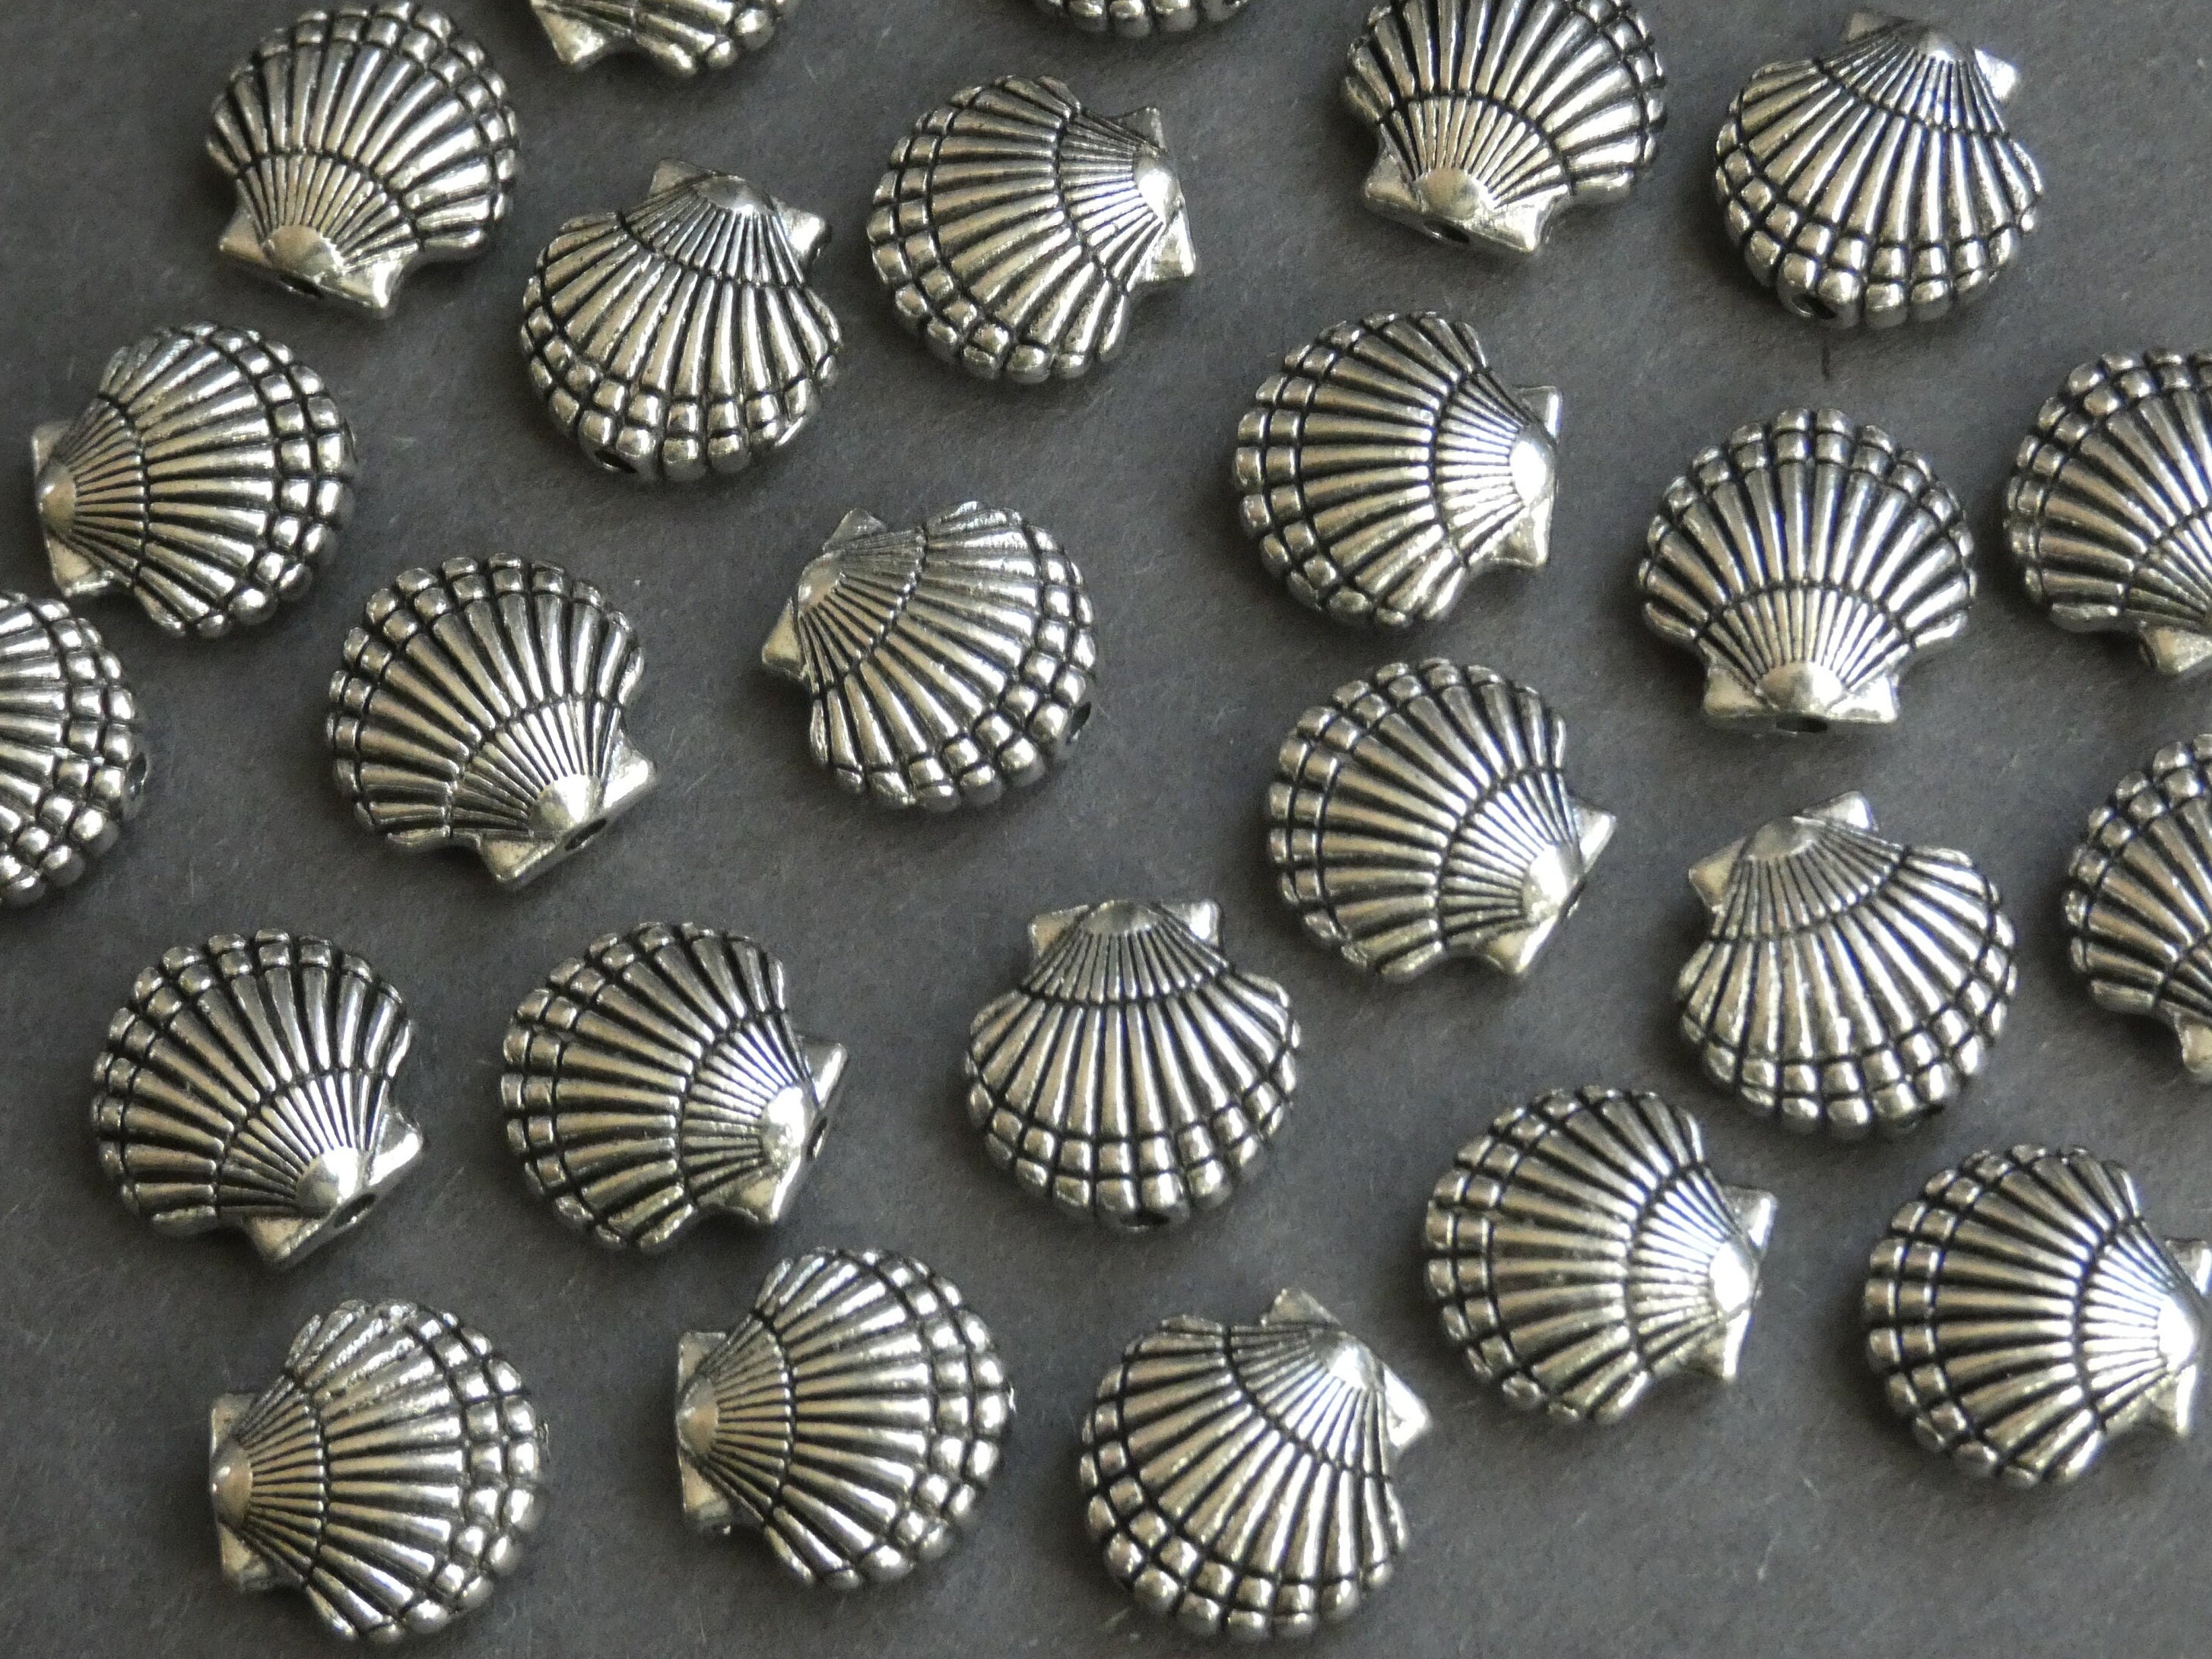 Tibetan Silver Spacer Beads (T11391) - 25 pieces